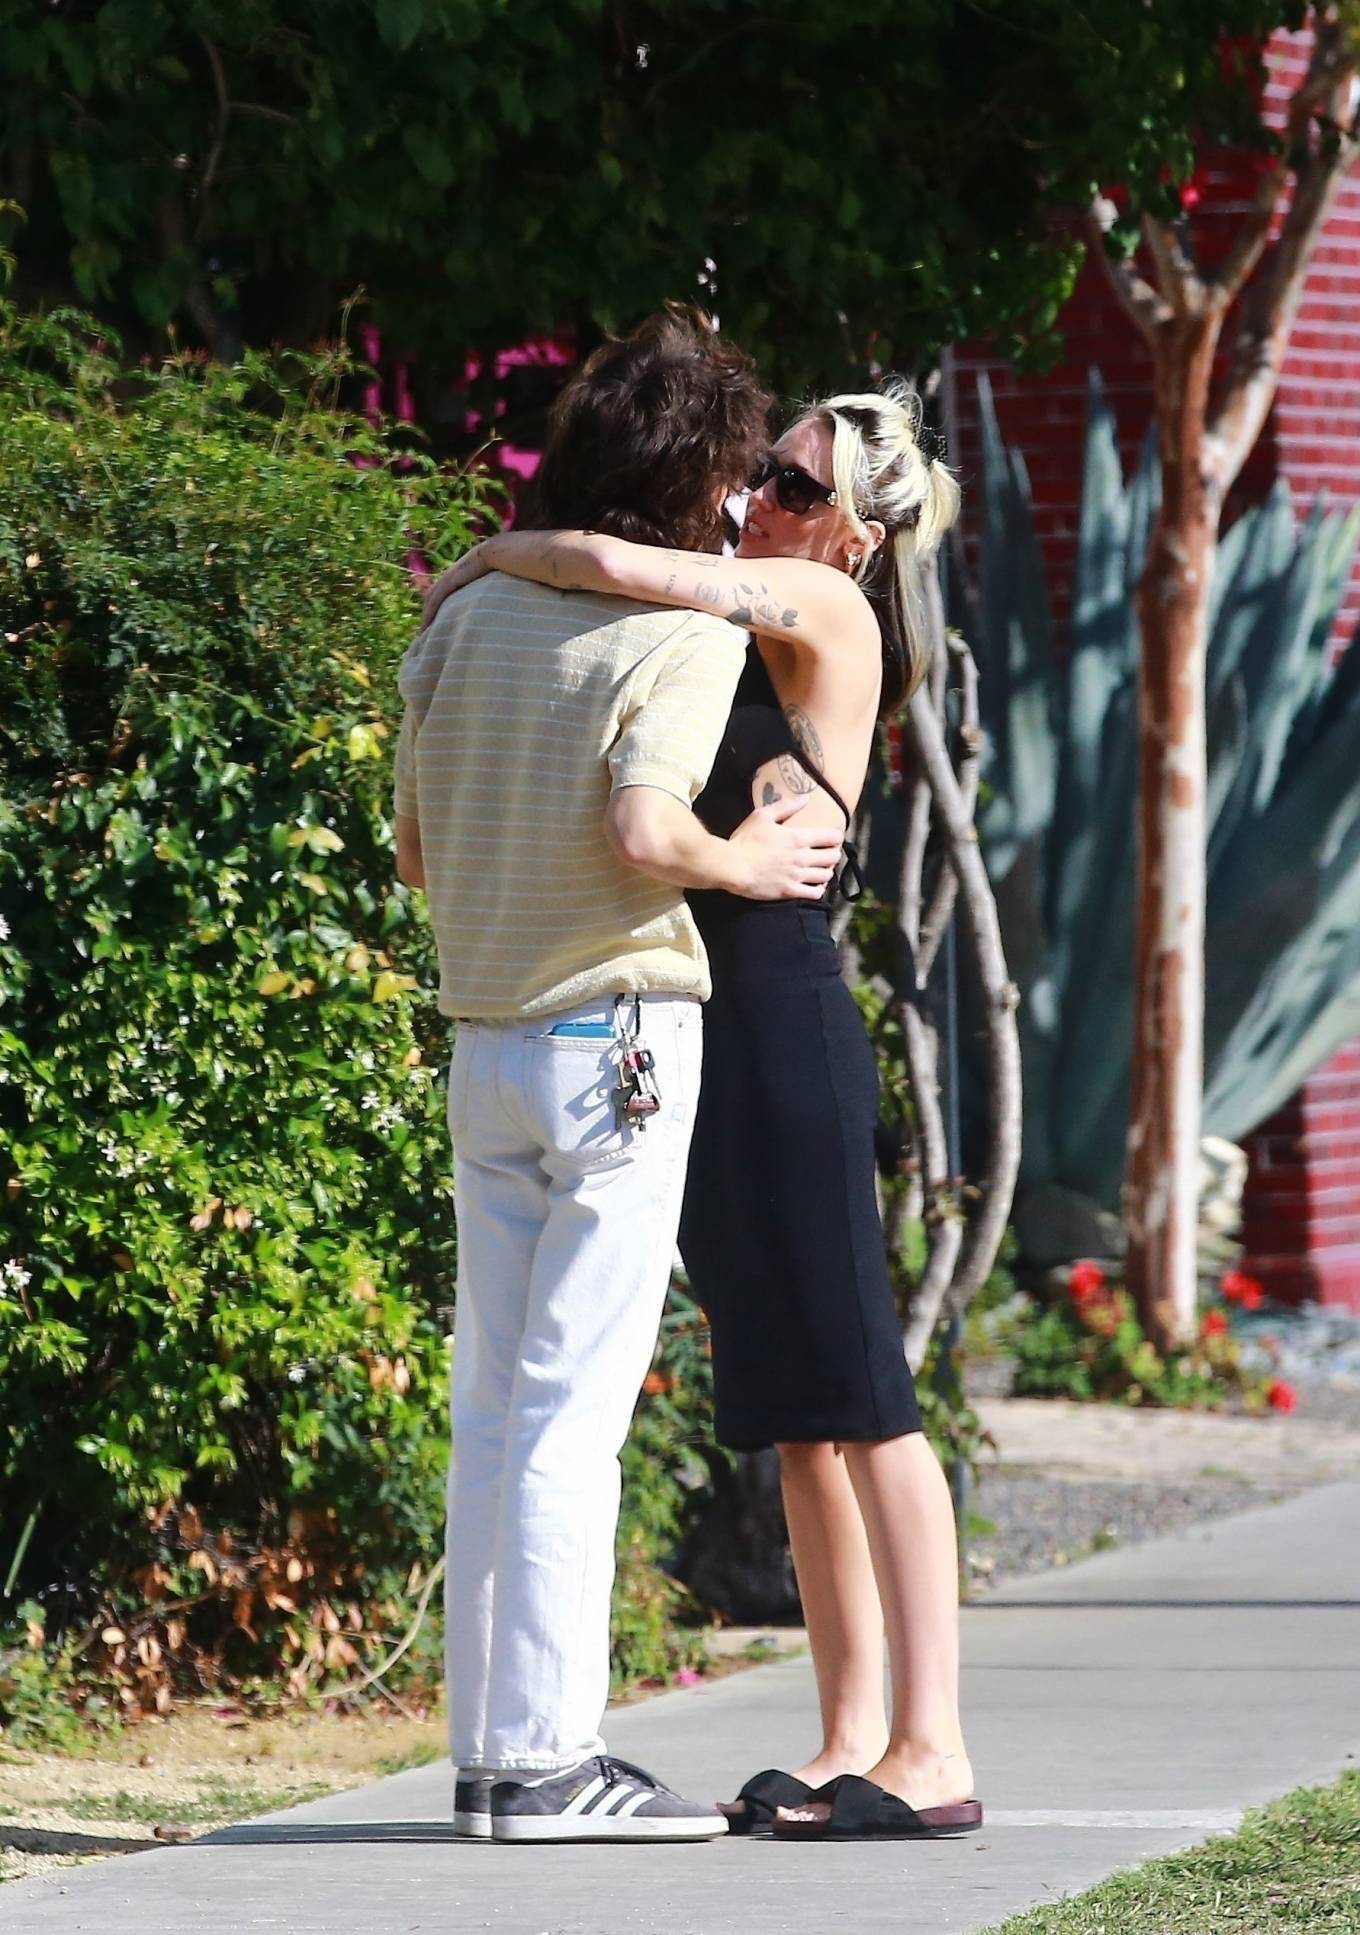 Miley Cyrus 2022 : Miley Cyrus – With Maxx Morando on the PDA in West Hollywood-08